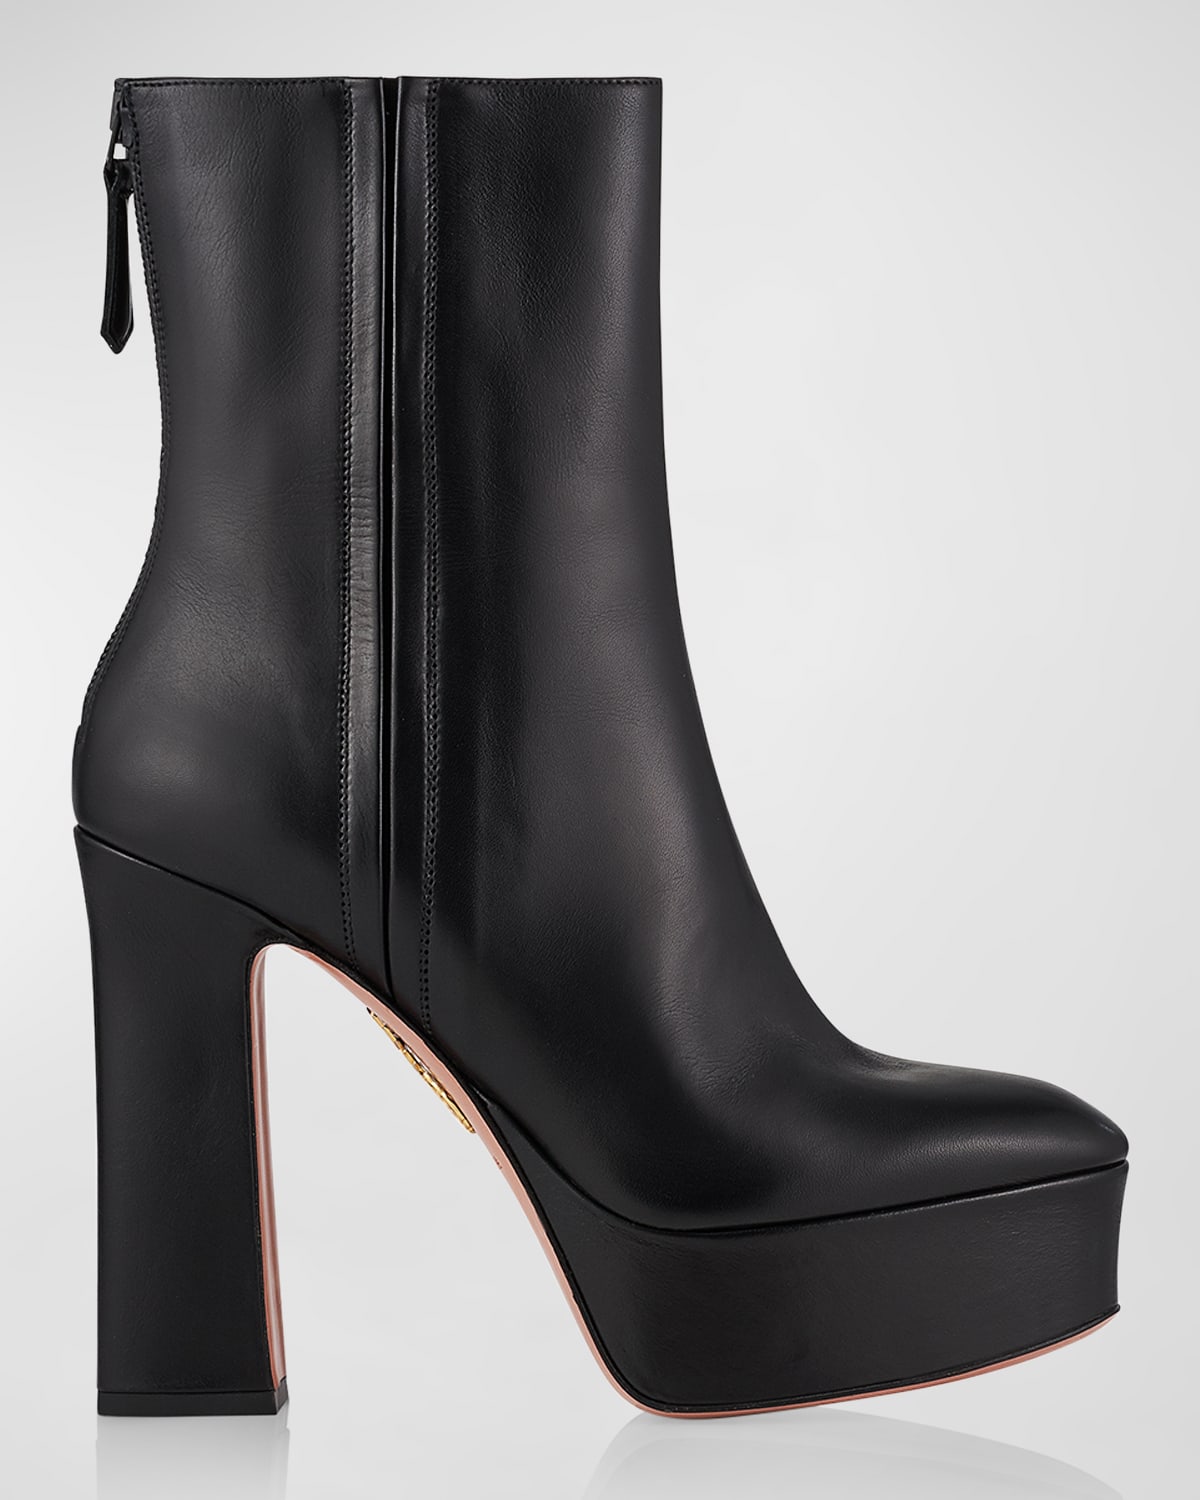 Groove Leather Platform Ankle Booties